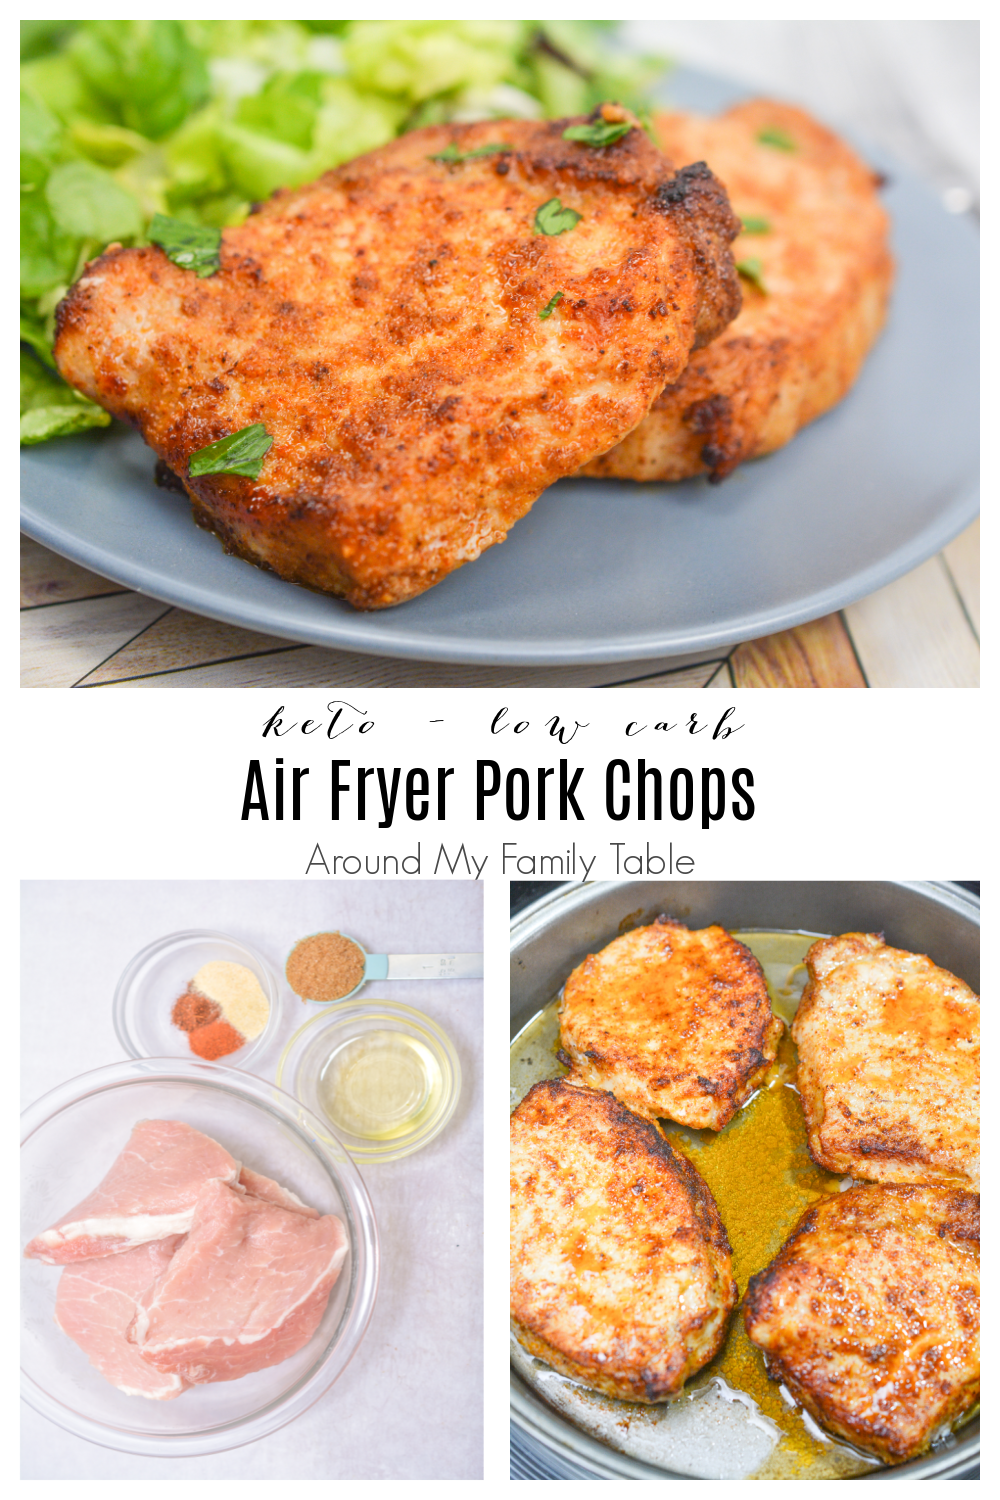 Dinner will be on the table in less than 30 minutes with my Air Fryer Pork Chops recipe.  They are tender, juicy, and a hit with the whole family.  via @slingmama